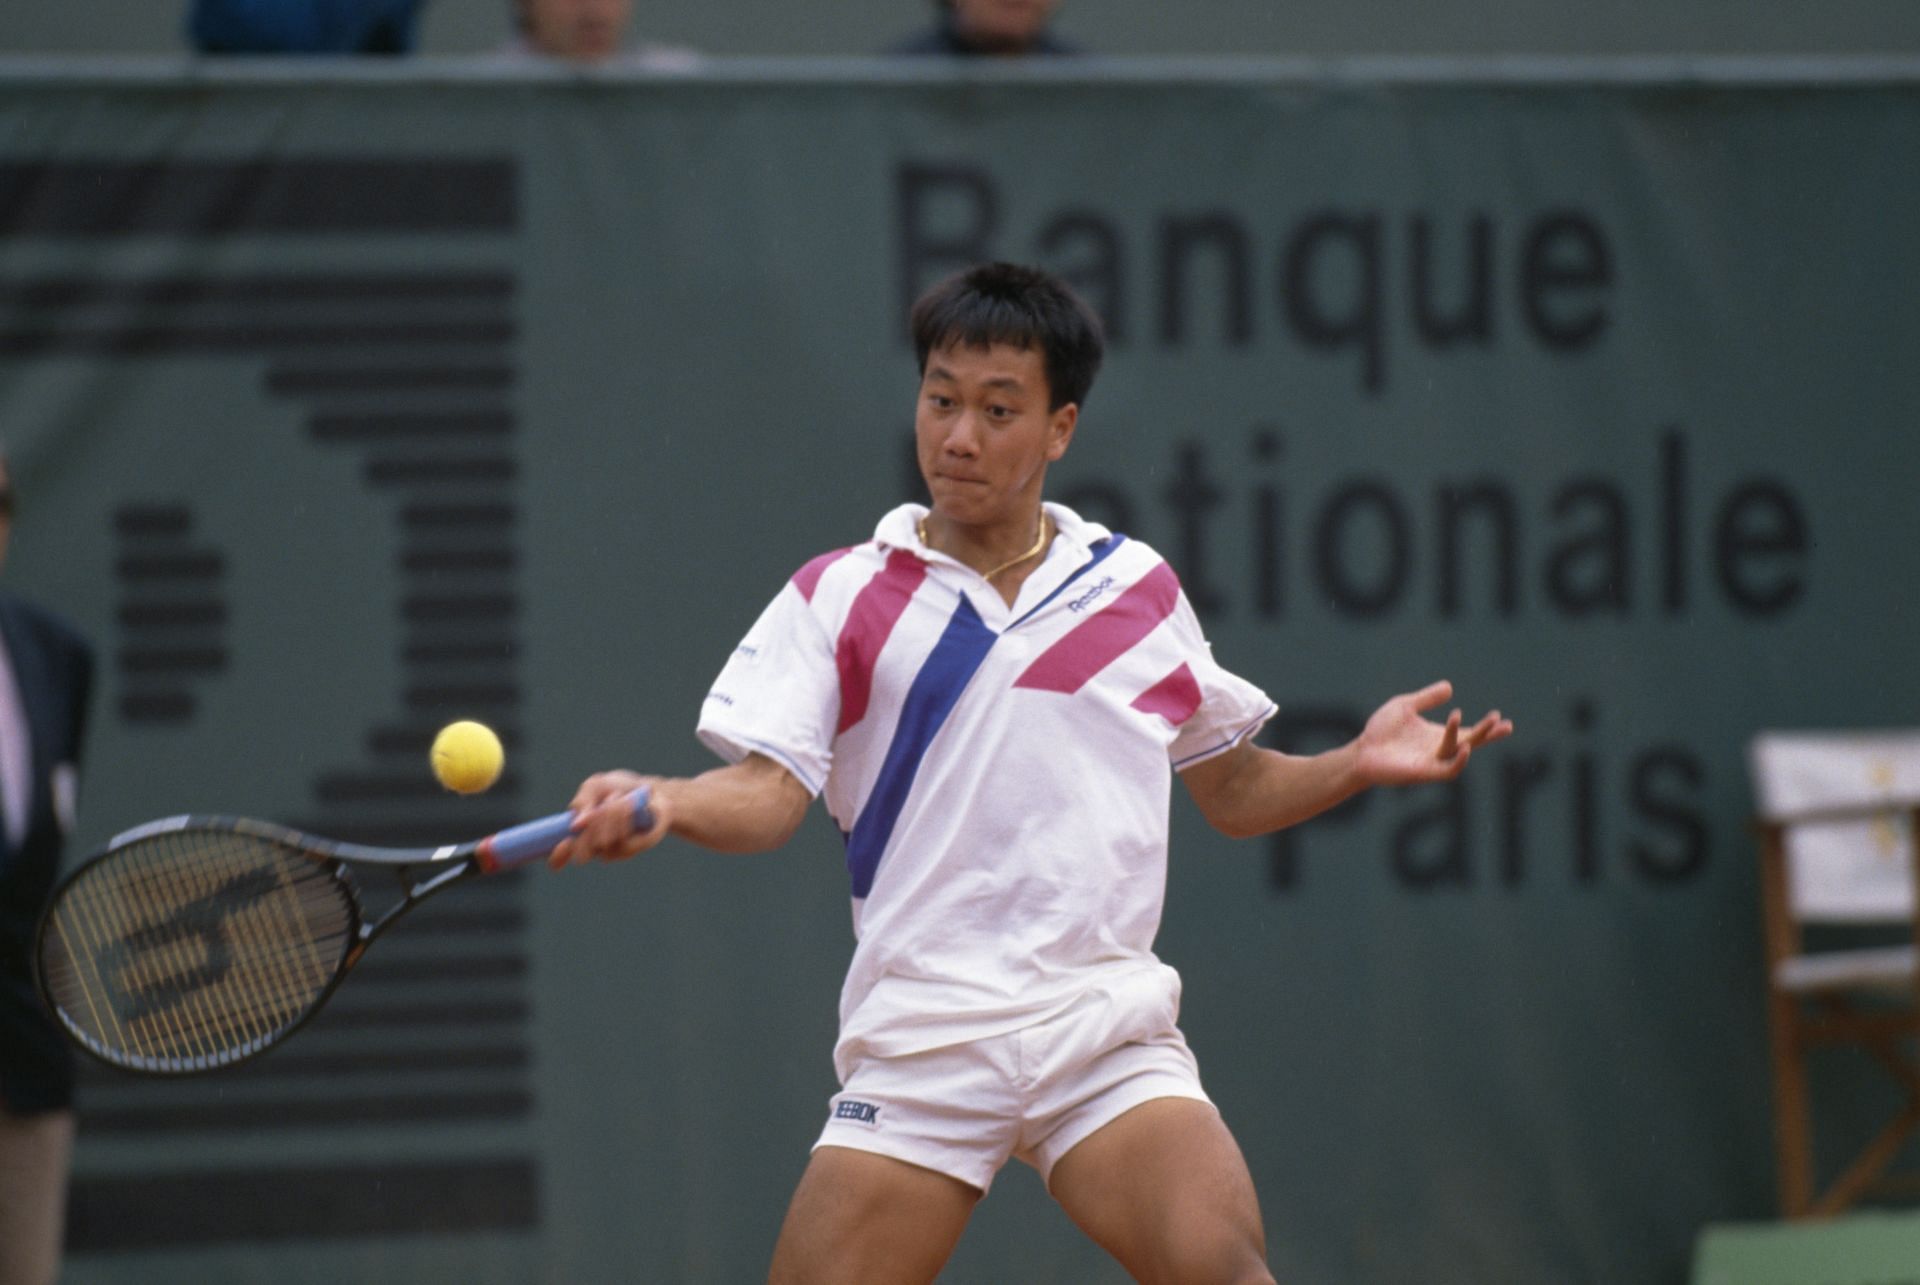 Michael Chang is the youngest Grand Slam champion in the Open Era